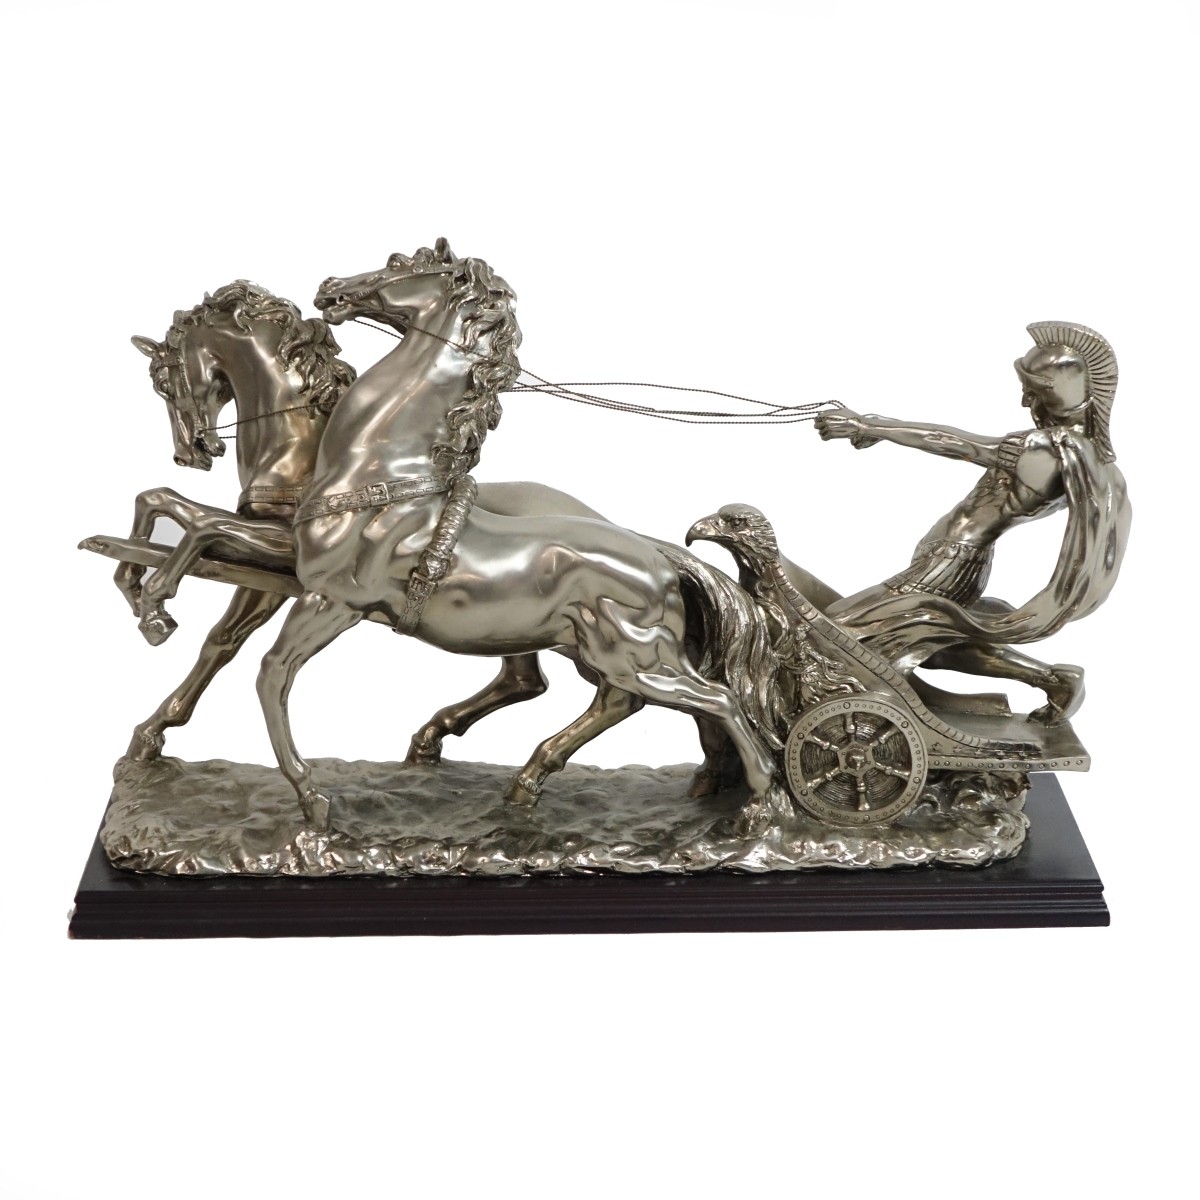 Large 20th C. Silver-Clad Roman Chariot